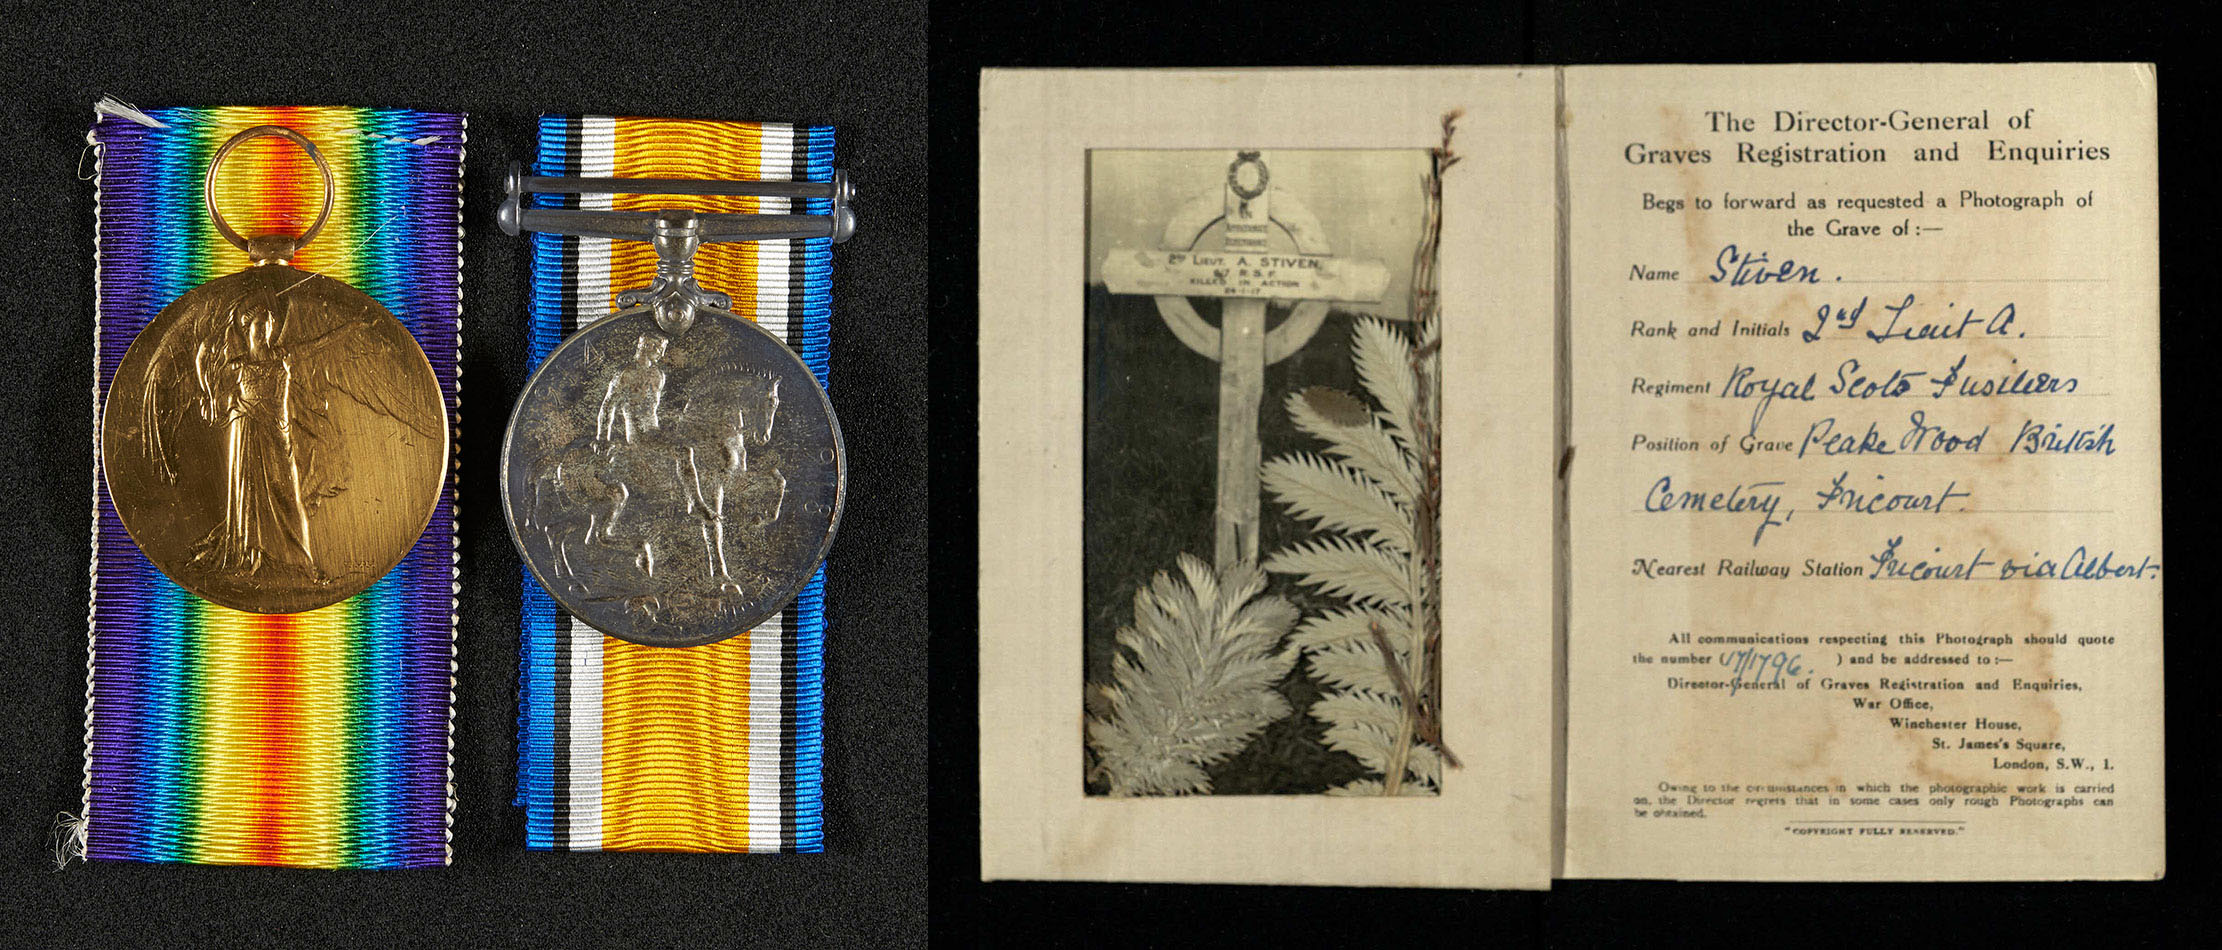 Posthumously awarded medals and Albert's gravestone in France.